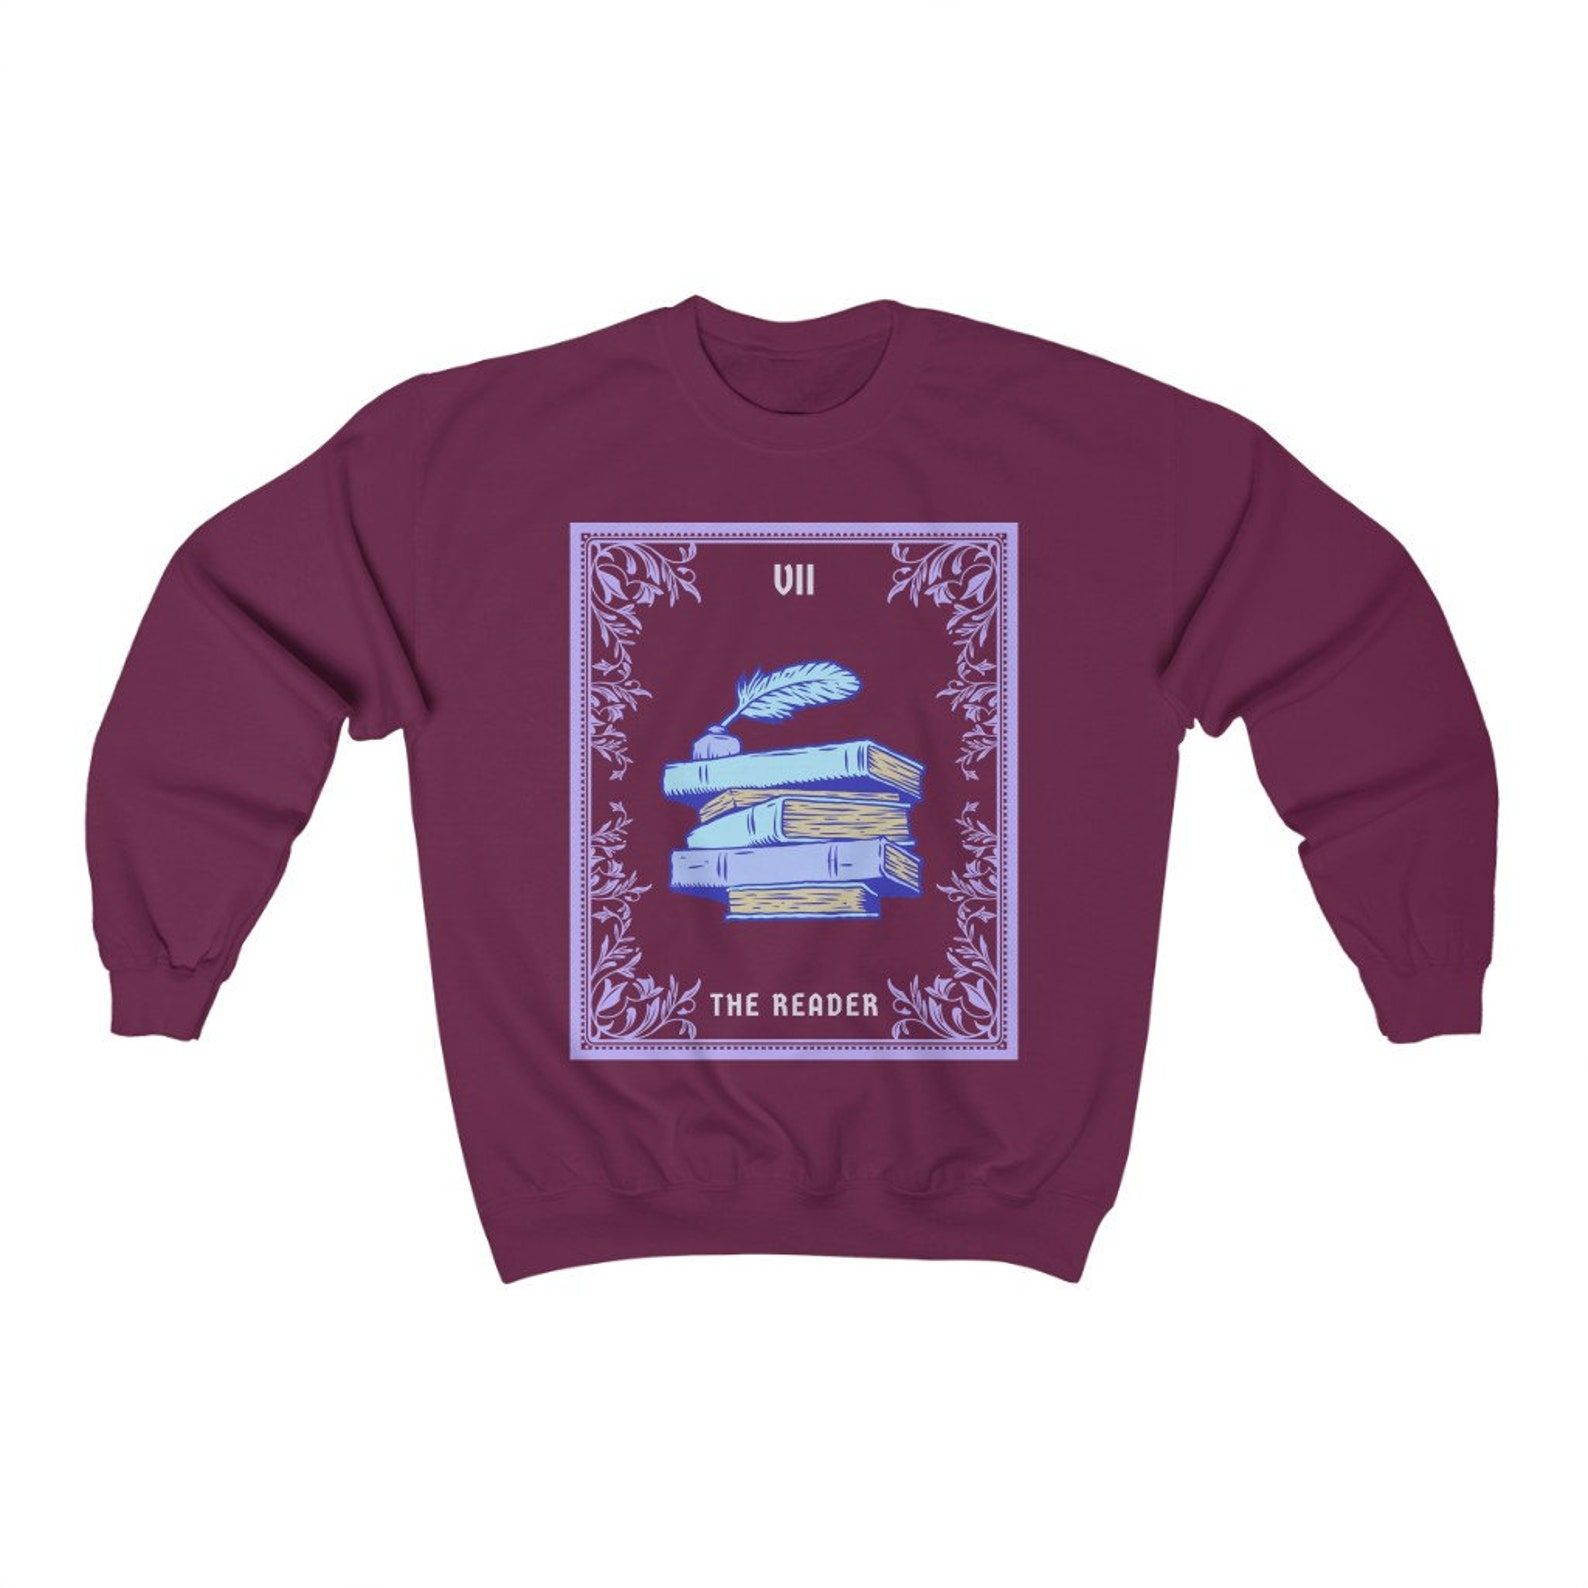 Purple sweatshirt with a tarot card design in the center. It's "The Reader" and featured a stack of purple and blue old books, along with a feather pen. 